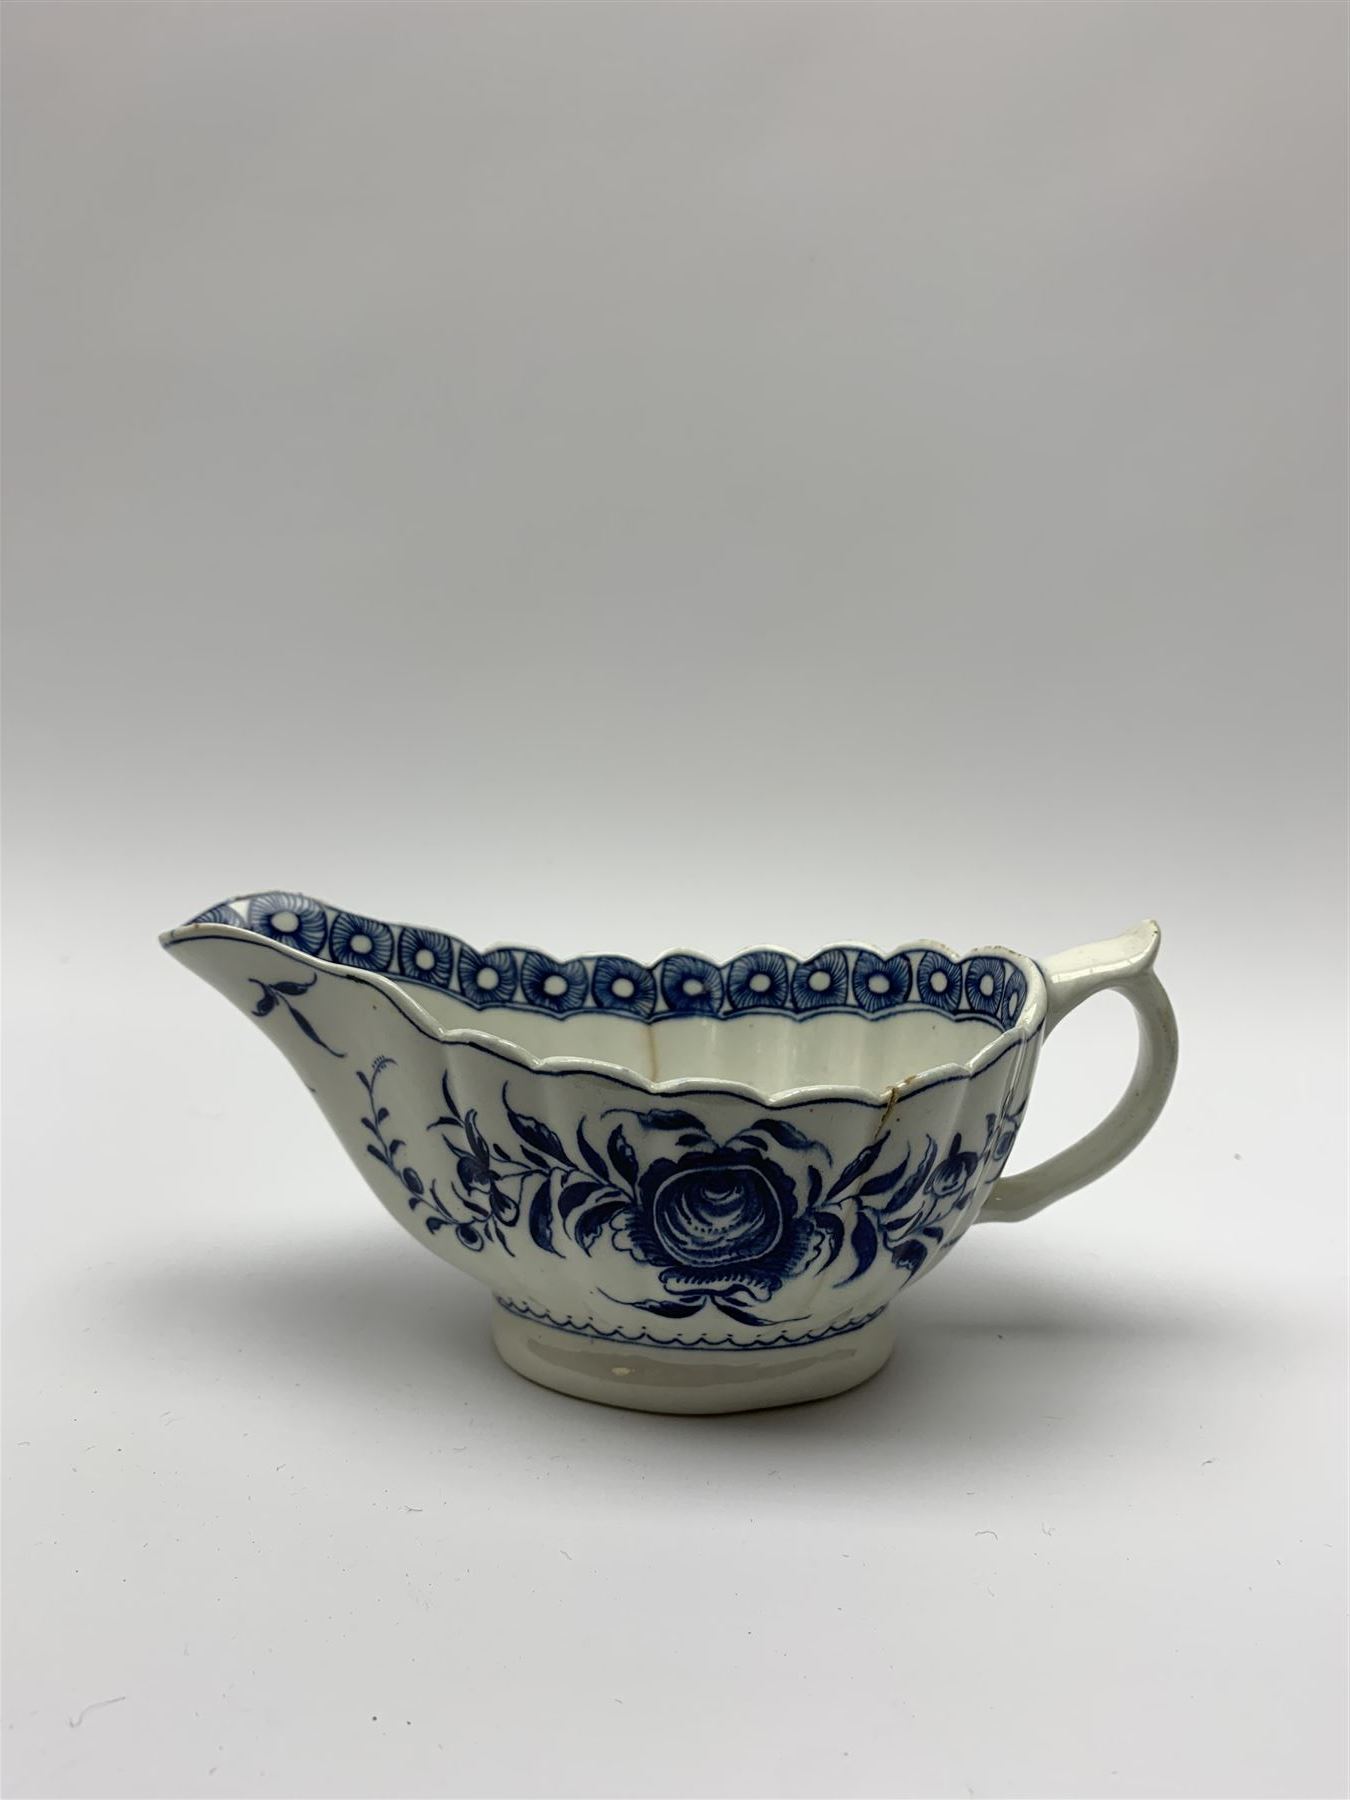 18th century Worcester sauce boat - Image 5 of 9